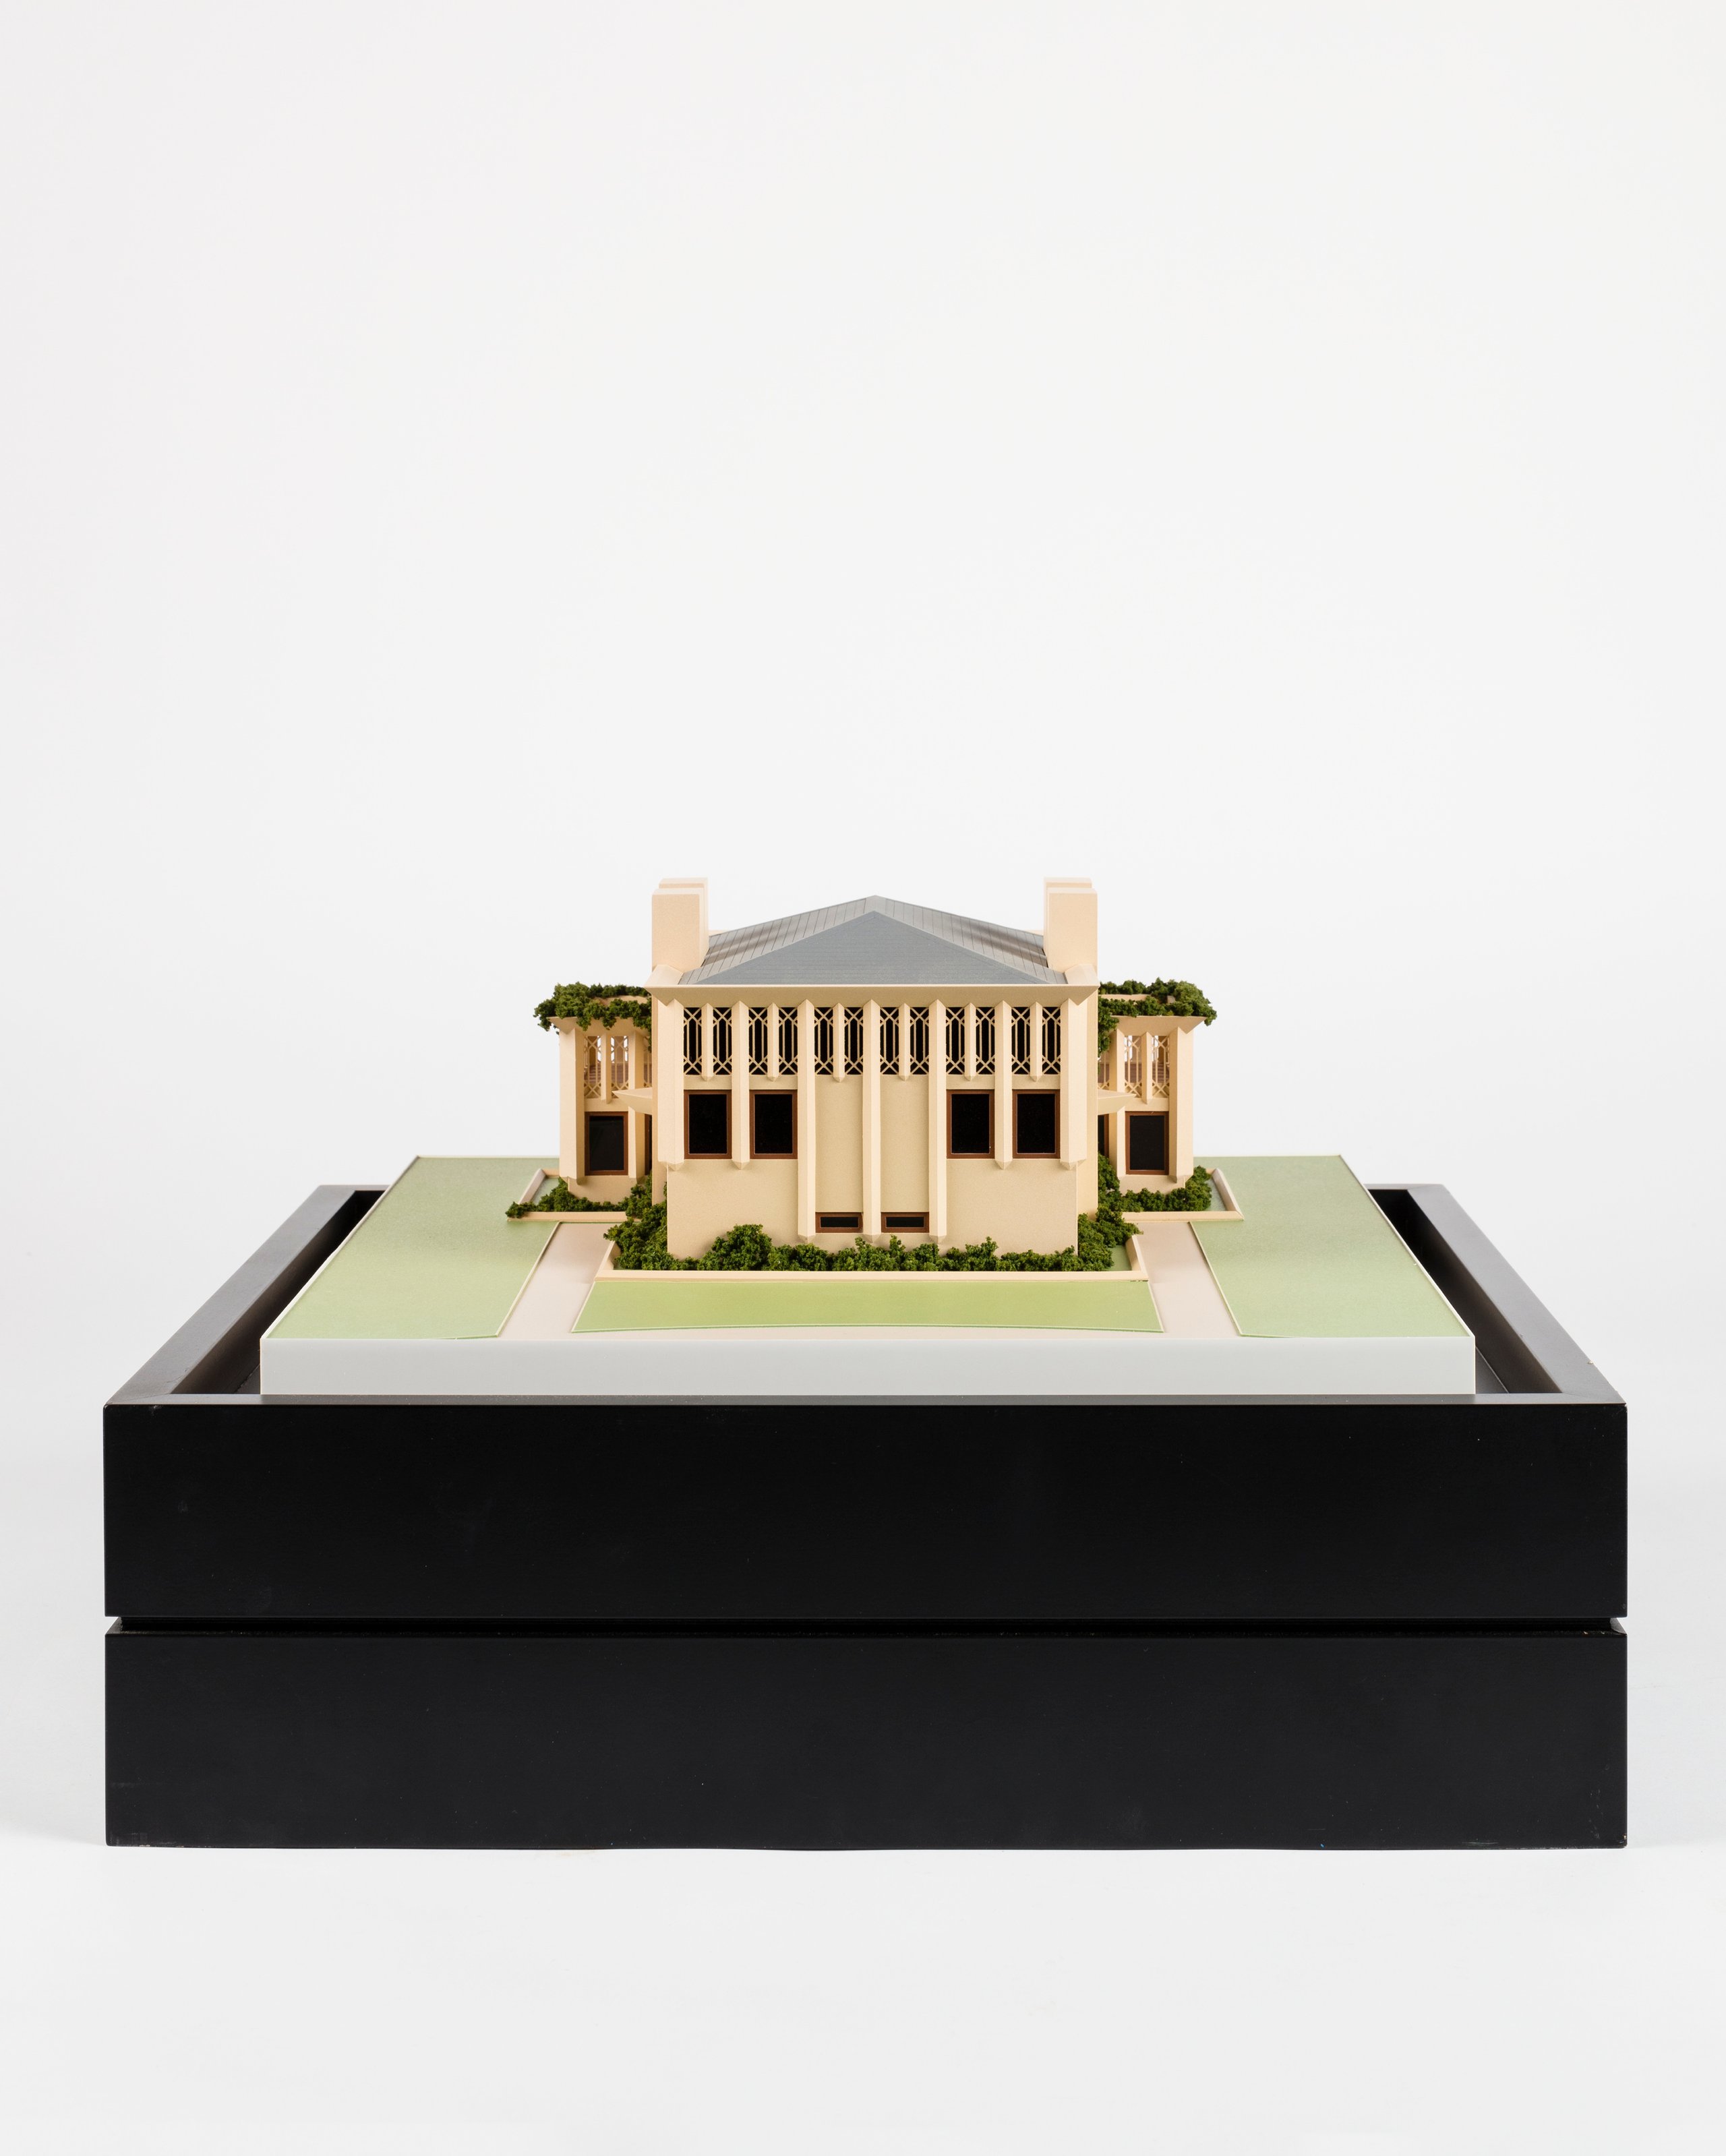 'Own House' architectural model designed by Marion Mahony and Walter Burley Griffin